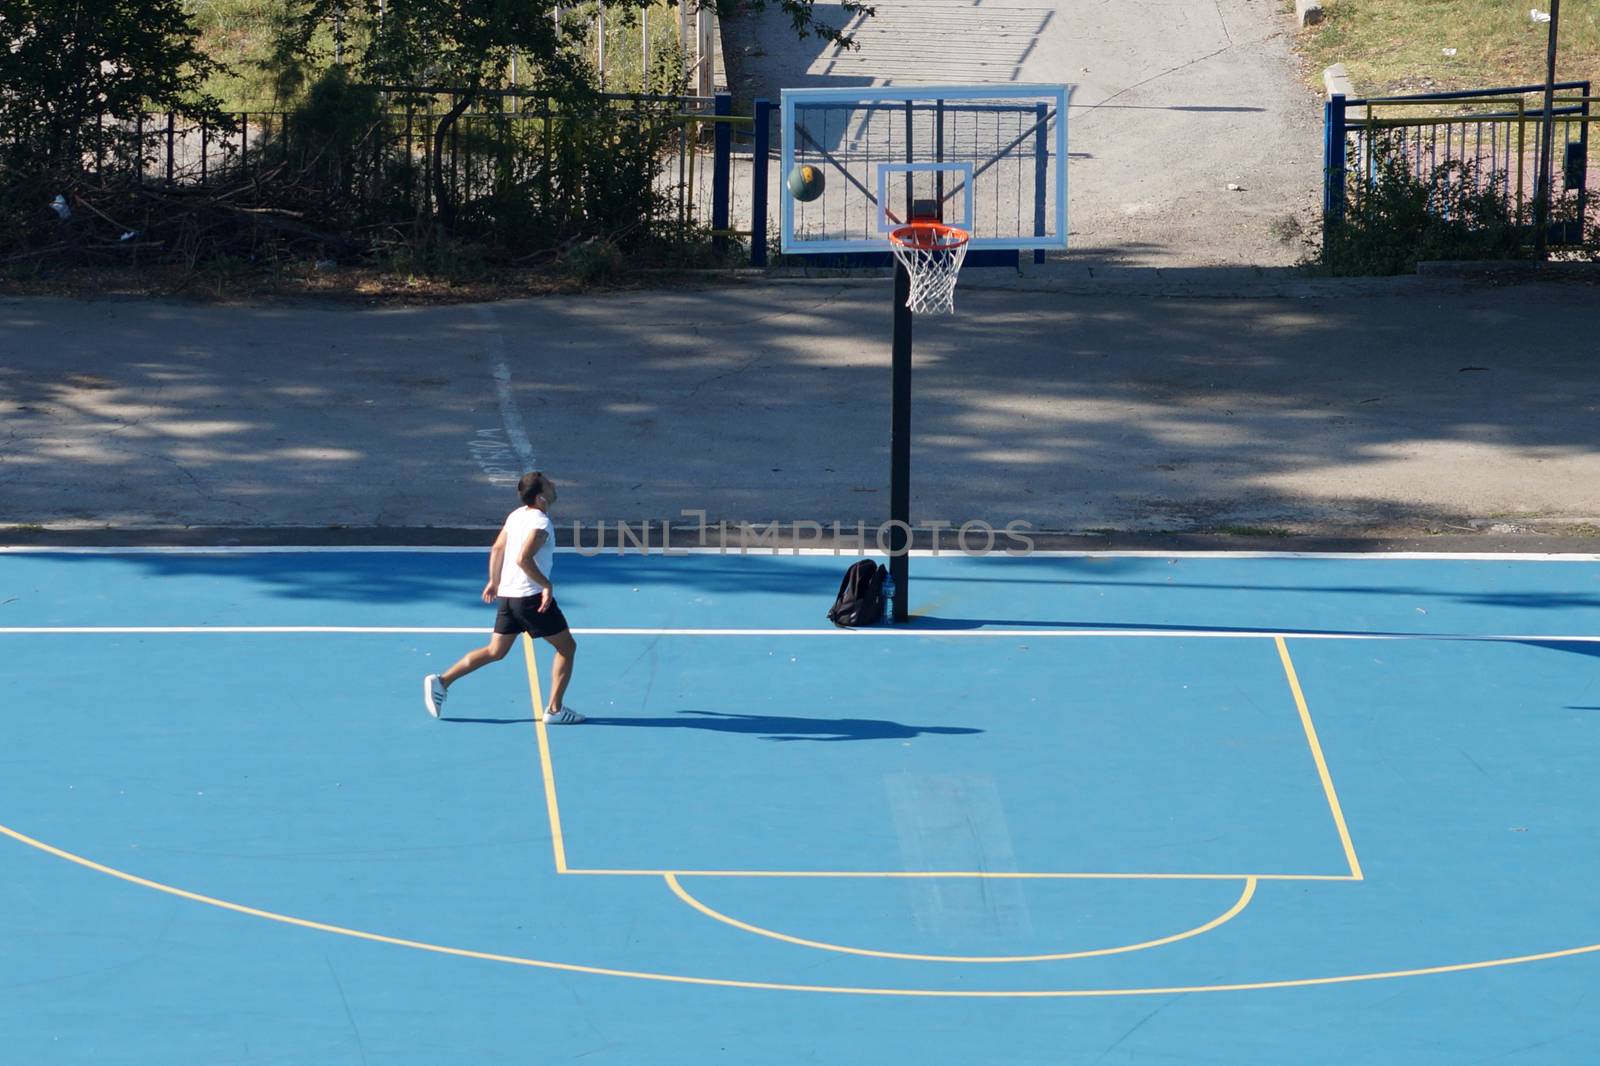 Varna, Bulgaria - August, 22, 2020: young man training with a ball on an outdoor basketball court